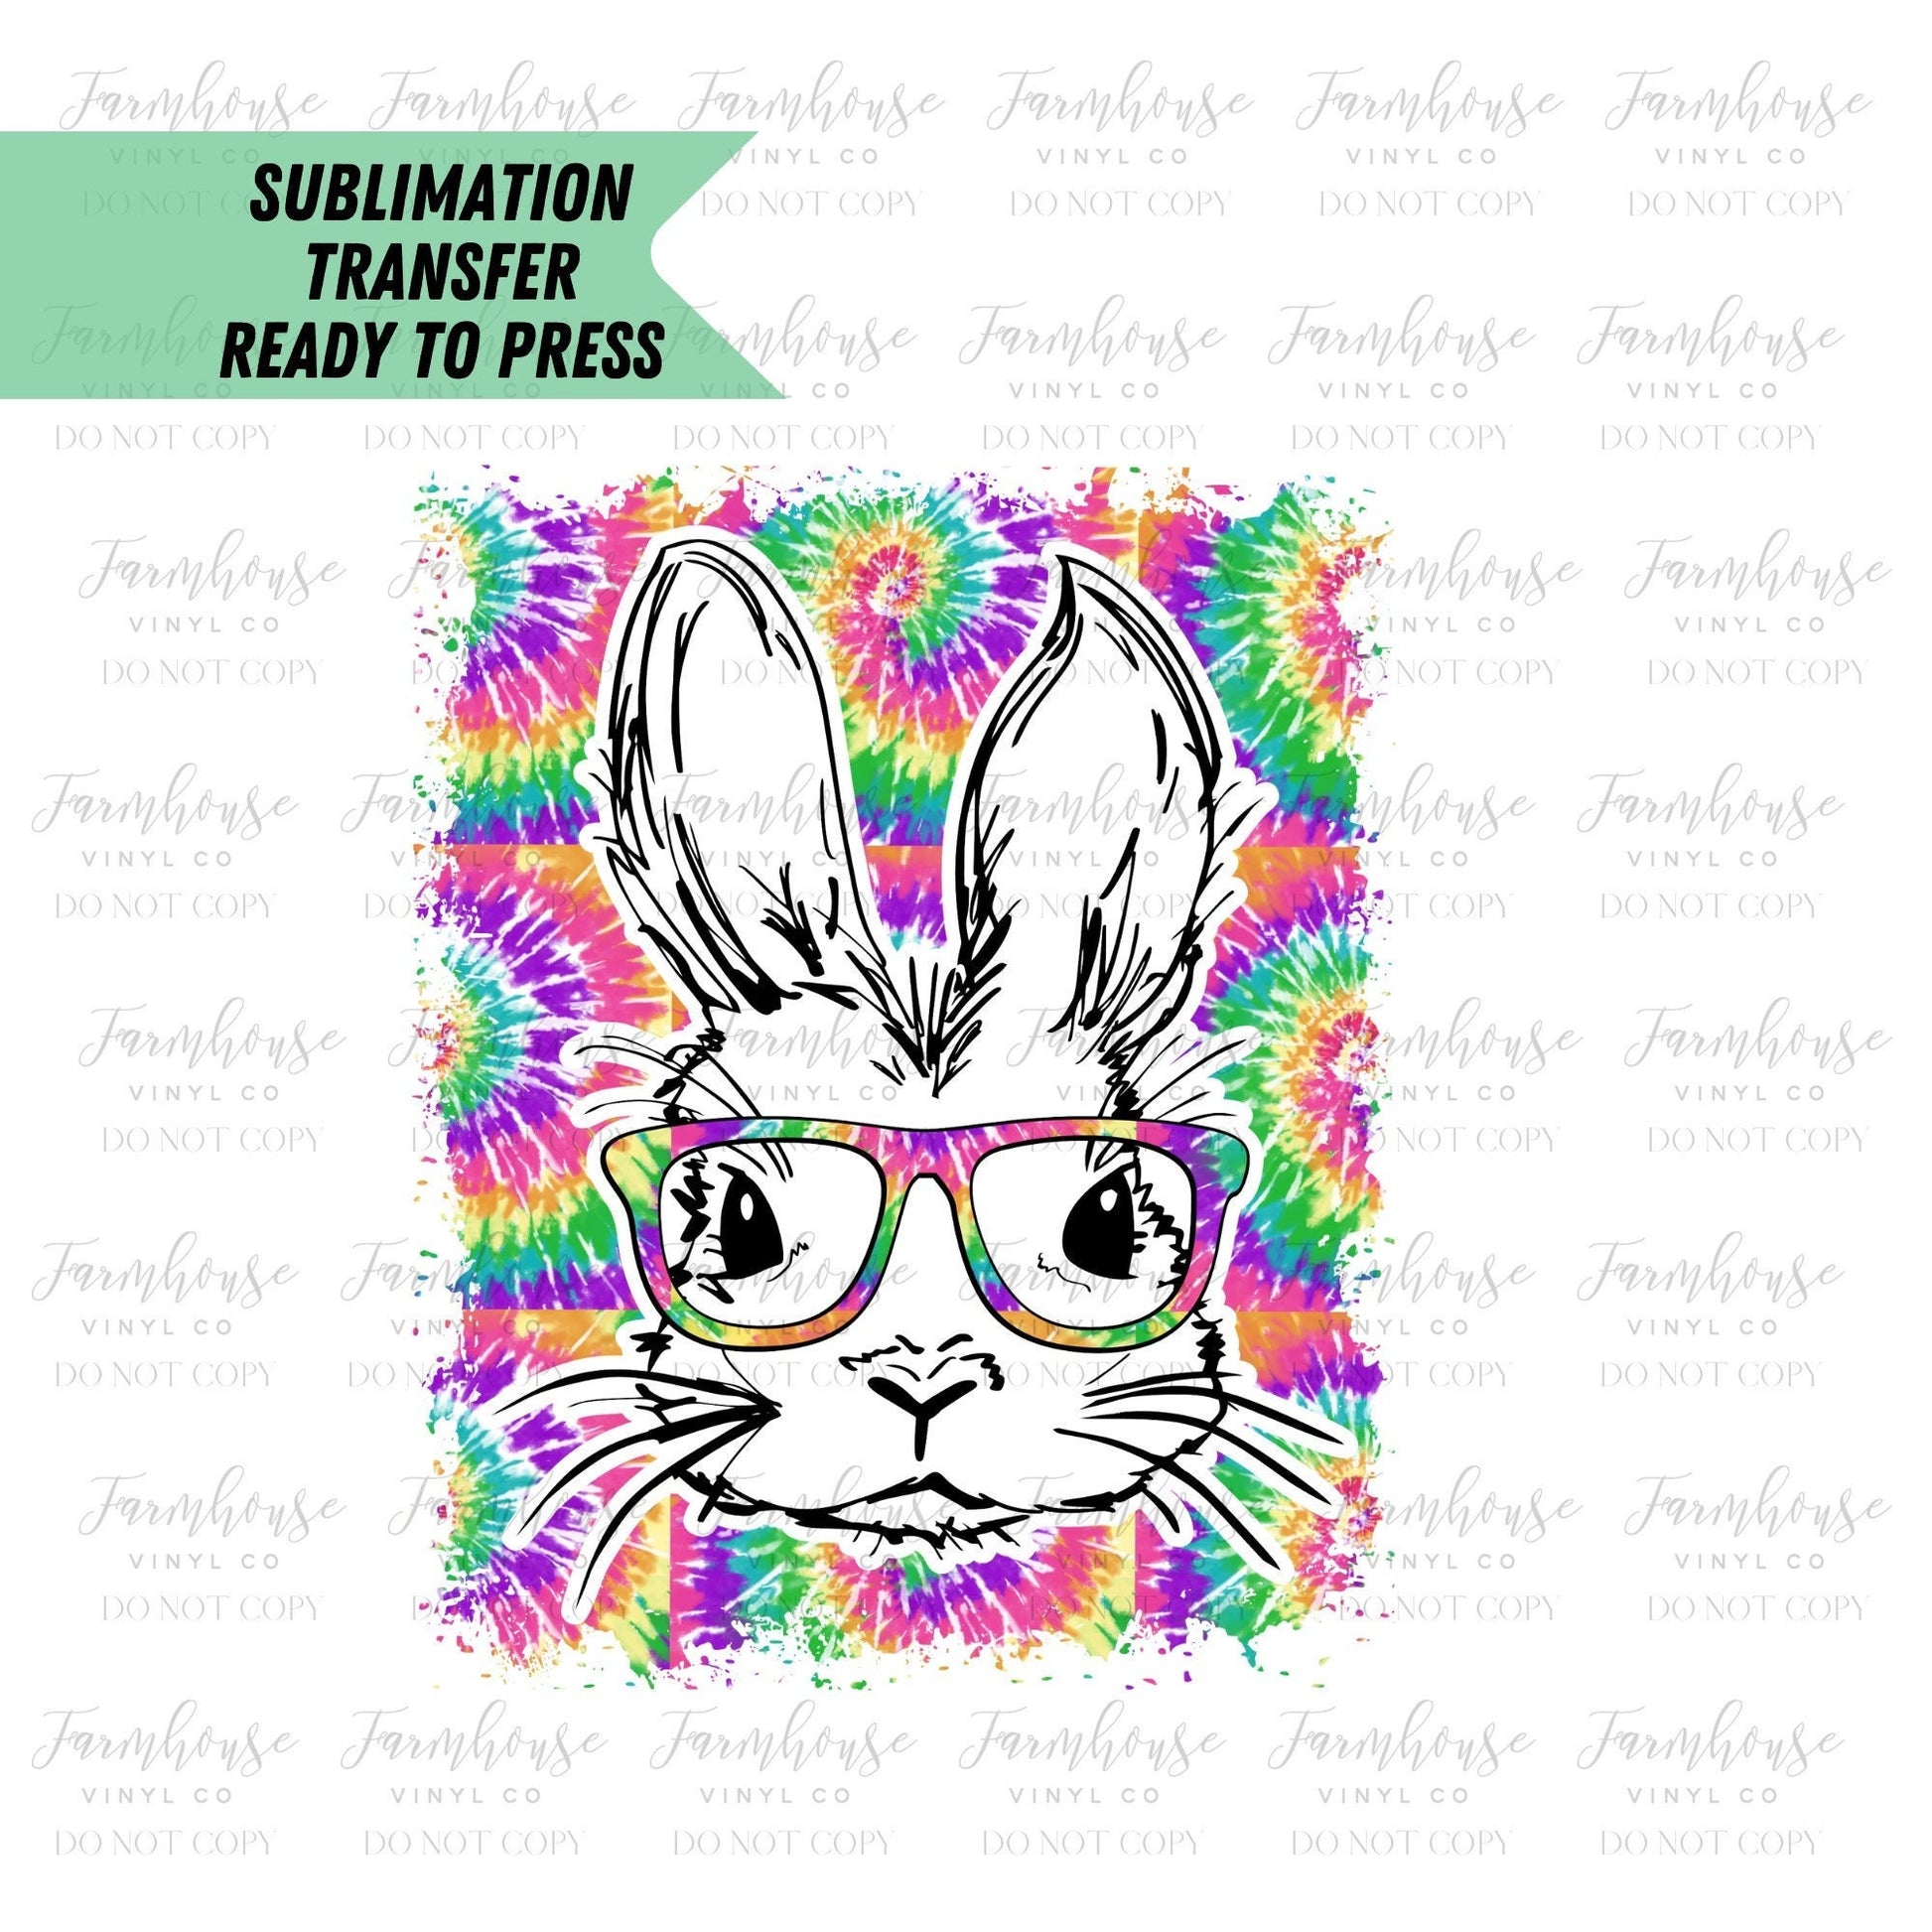 Tie Dye Easter Bunny Hipster BOHO, Ready To Press, Sublimation Transfers, DIY Sublimation Tee, Transfer Ready To Press, Heat Transfer Design - Farmhouse Vinyl Co